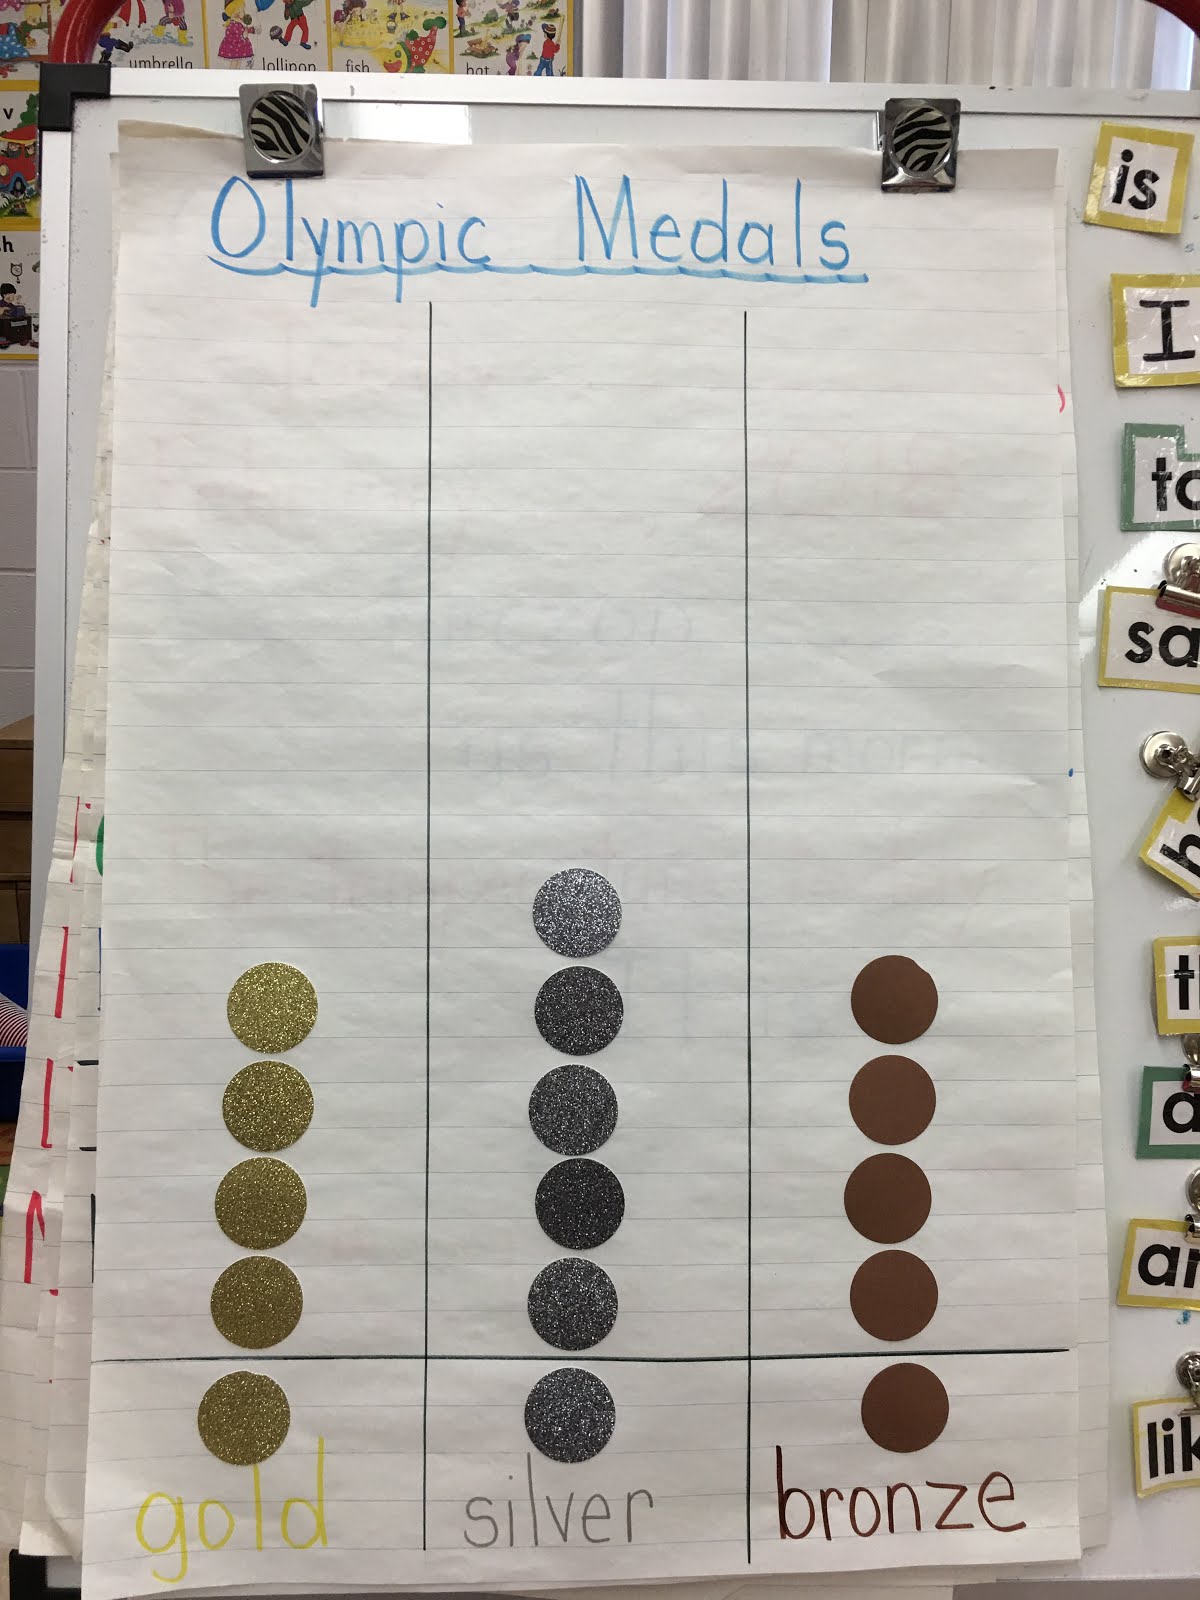 Our Medal Graph